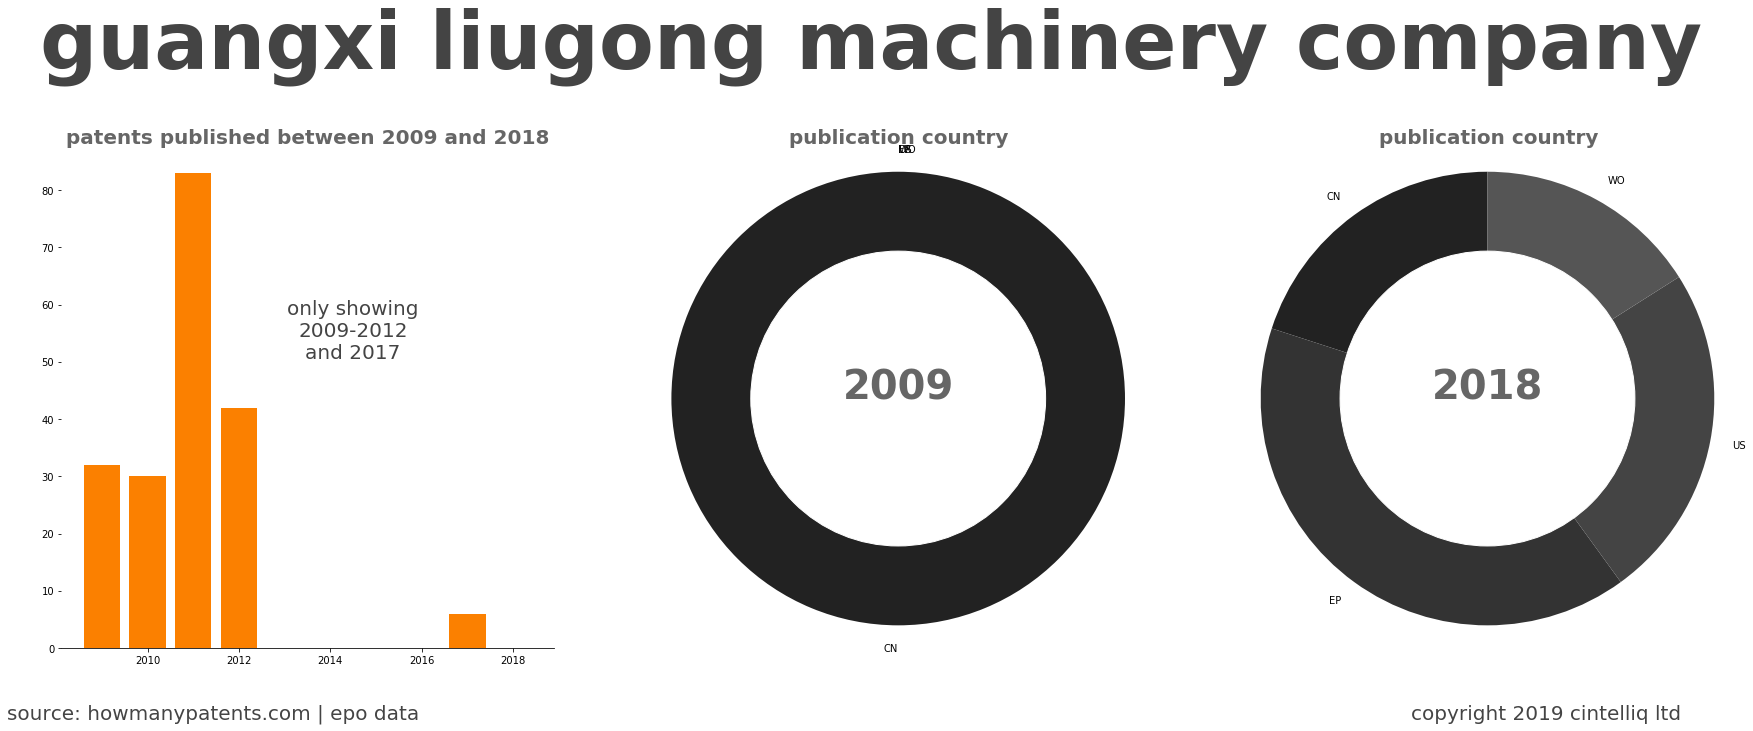 summary of patents for Guangxi Liugong Machinery Company